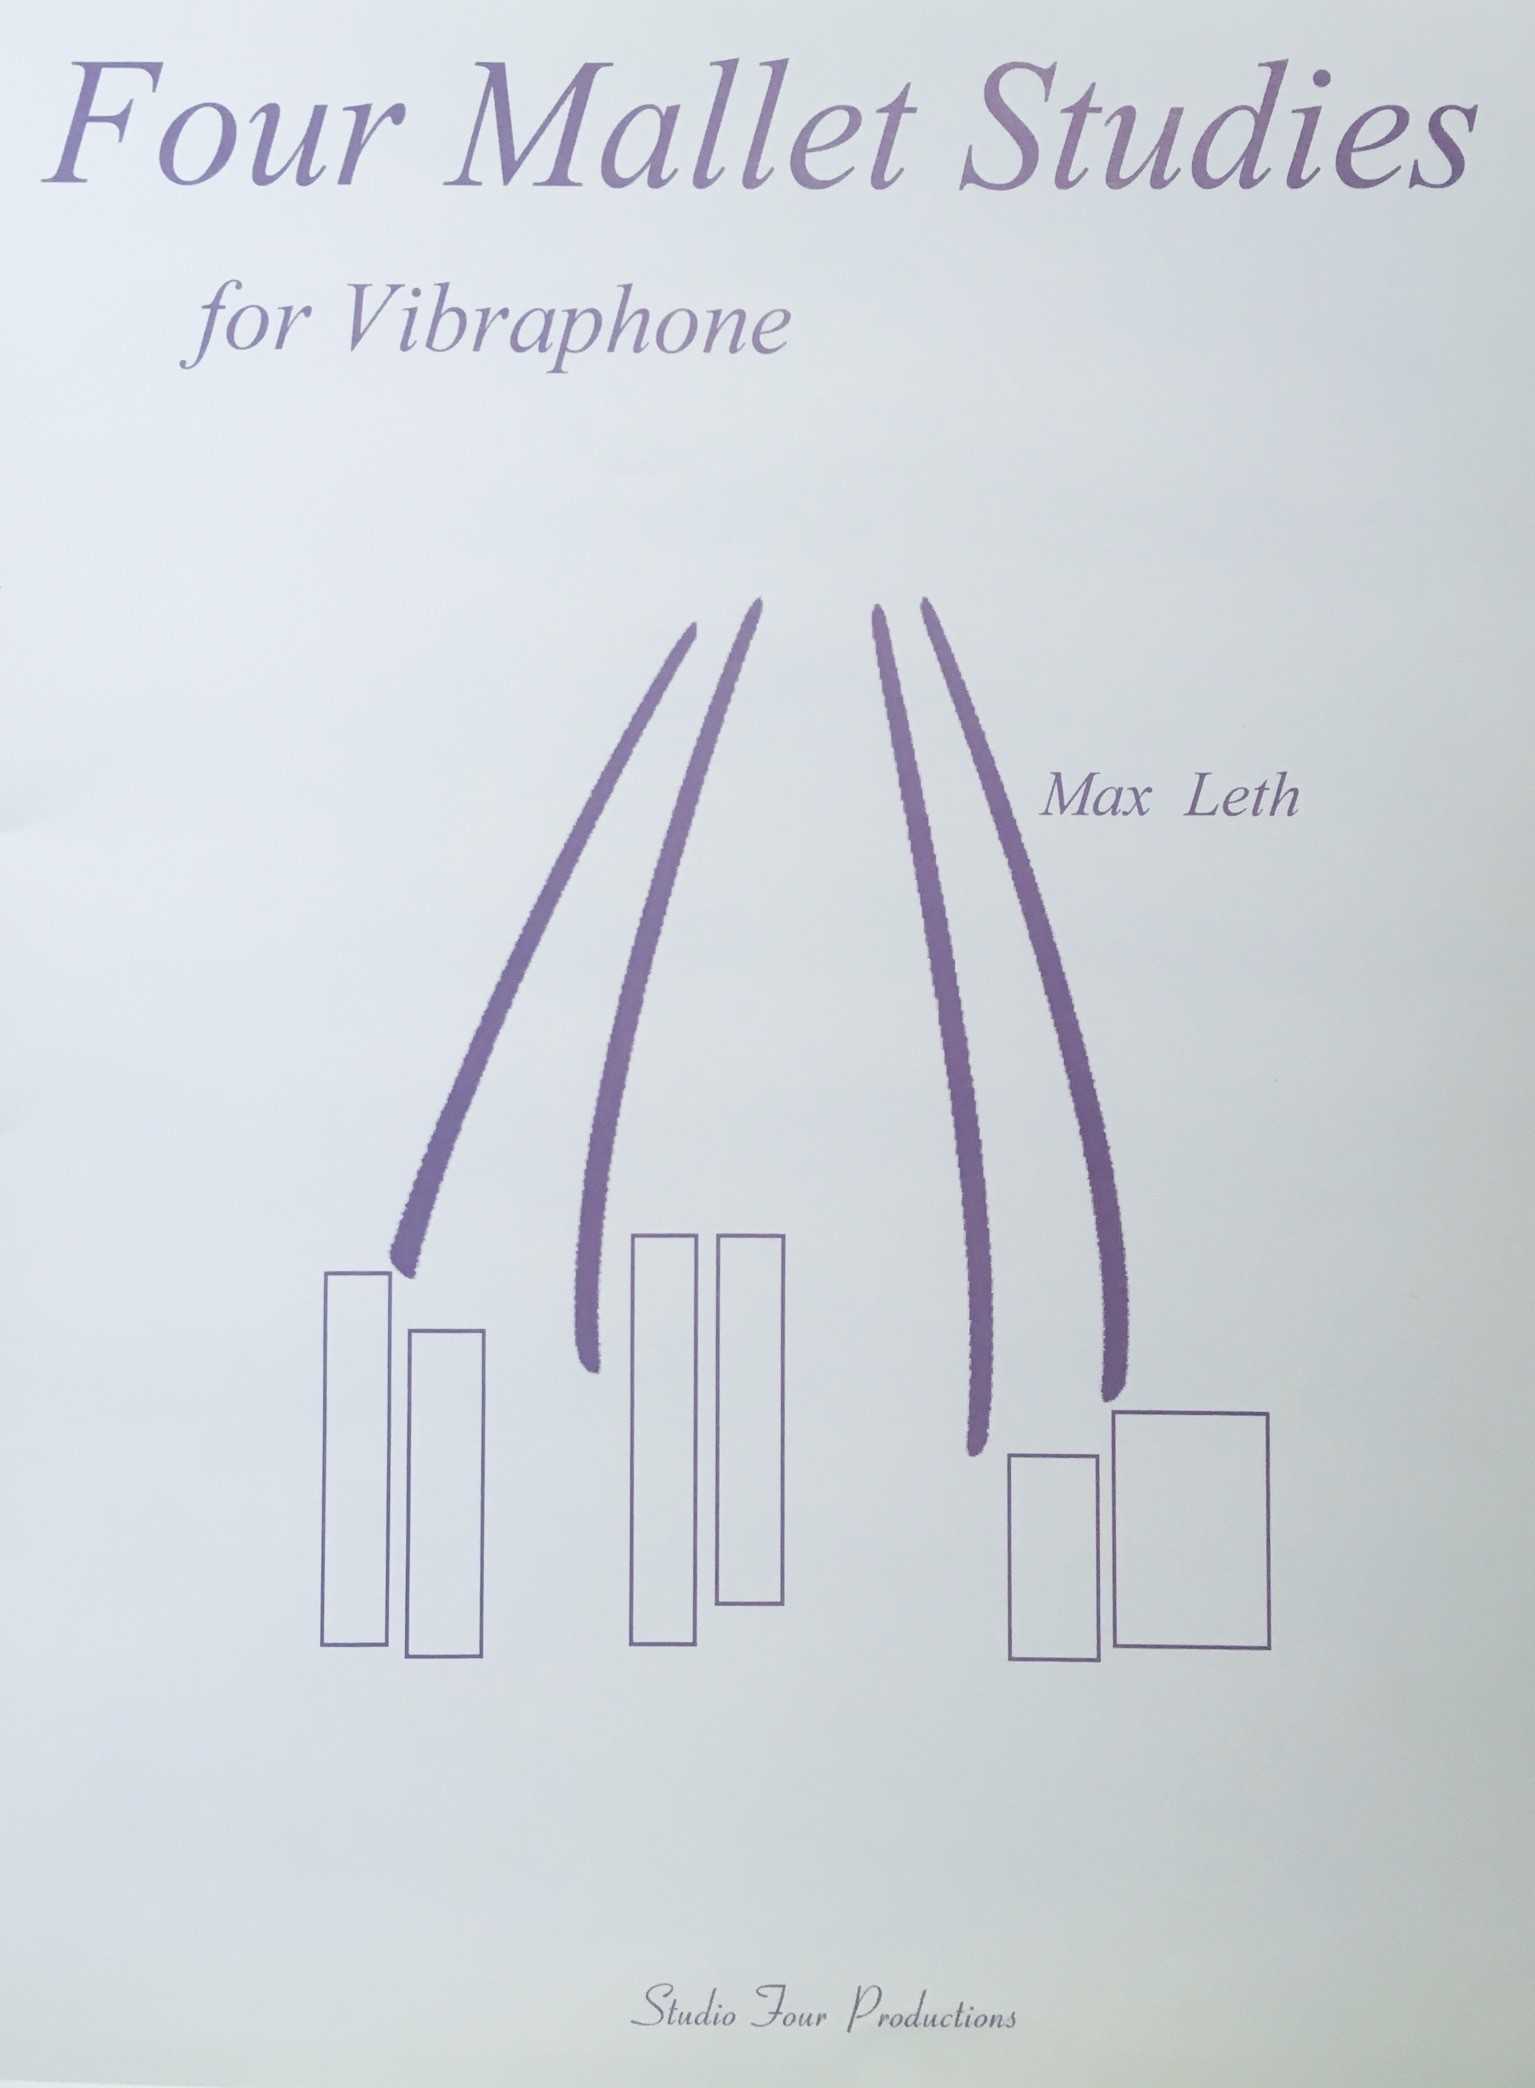 Four Mallet Studies for Vibraphone by Max Leth